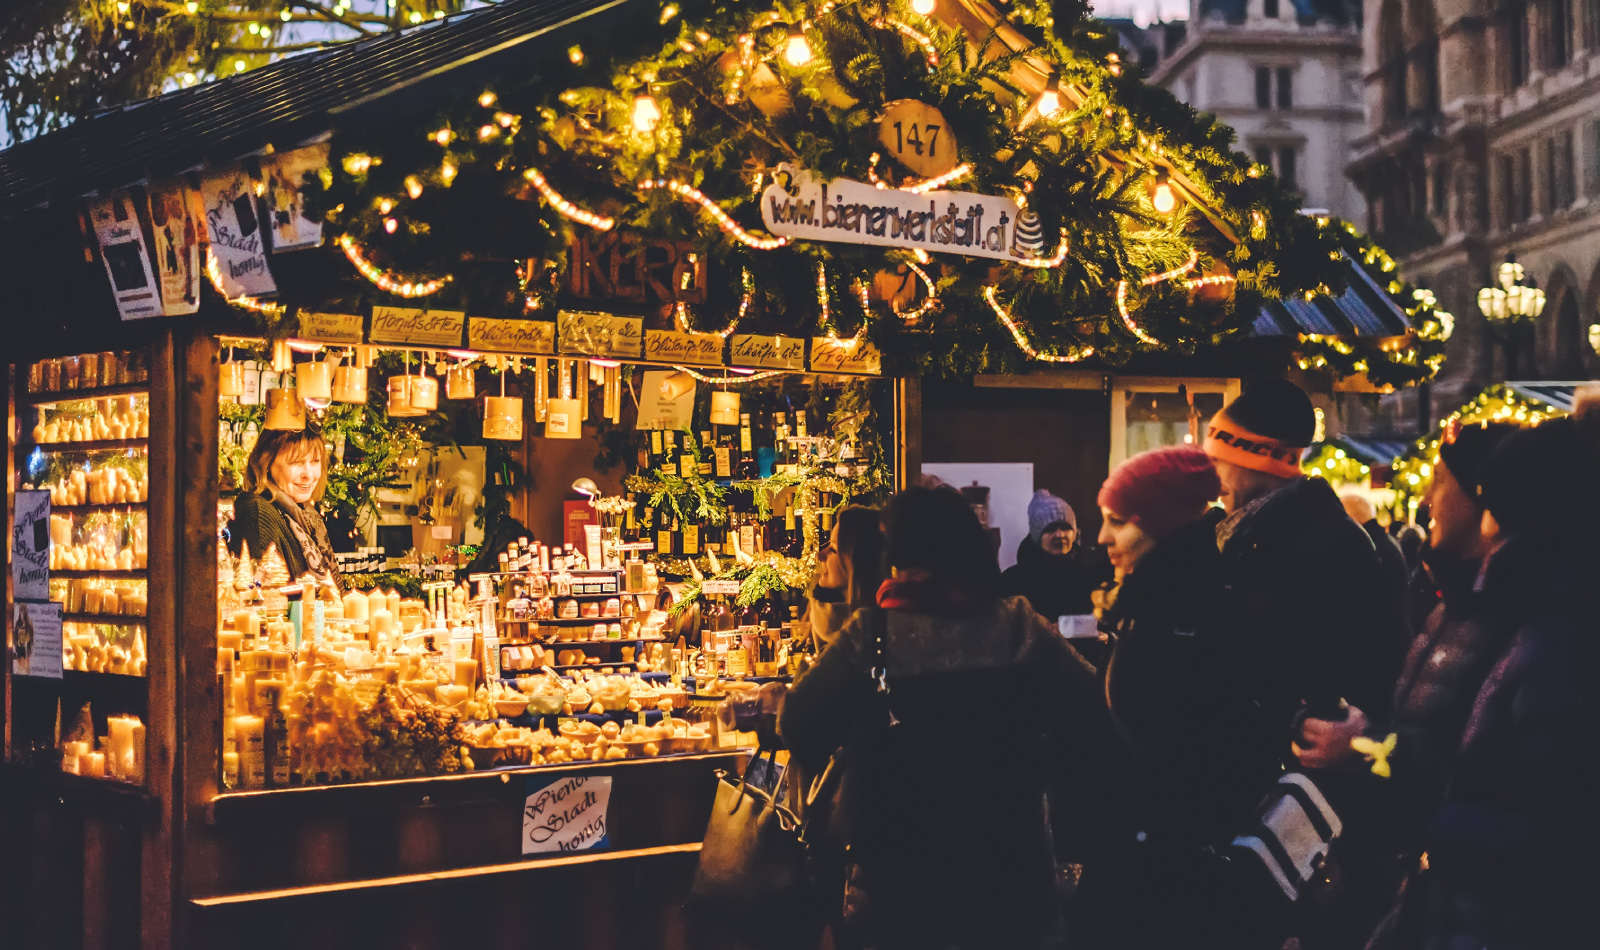 Christmas markets with wooden houses